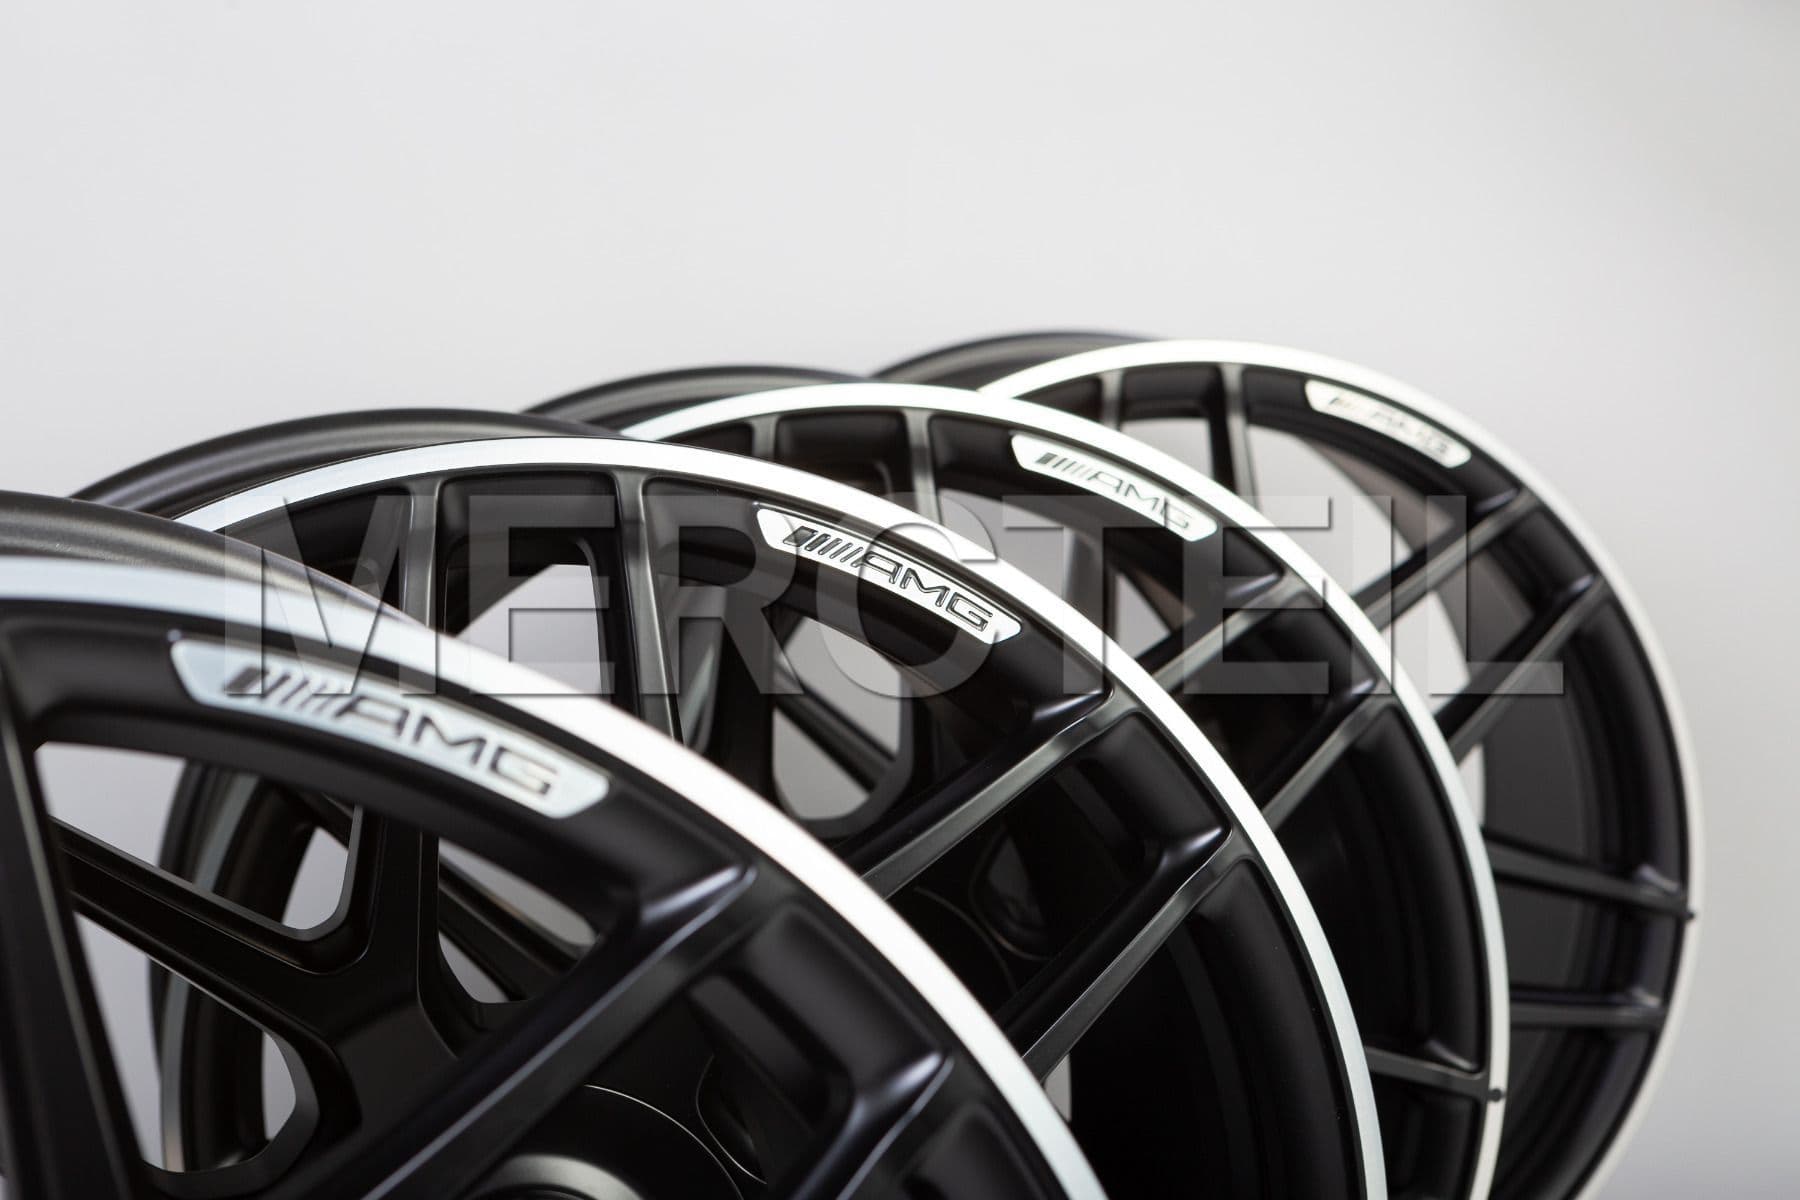 E63 AMG Rims Forged Black 20 Inch W213 Genuine Mercedes Benz (part number A21340131007X71)